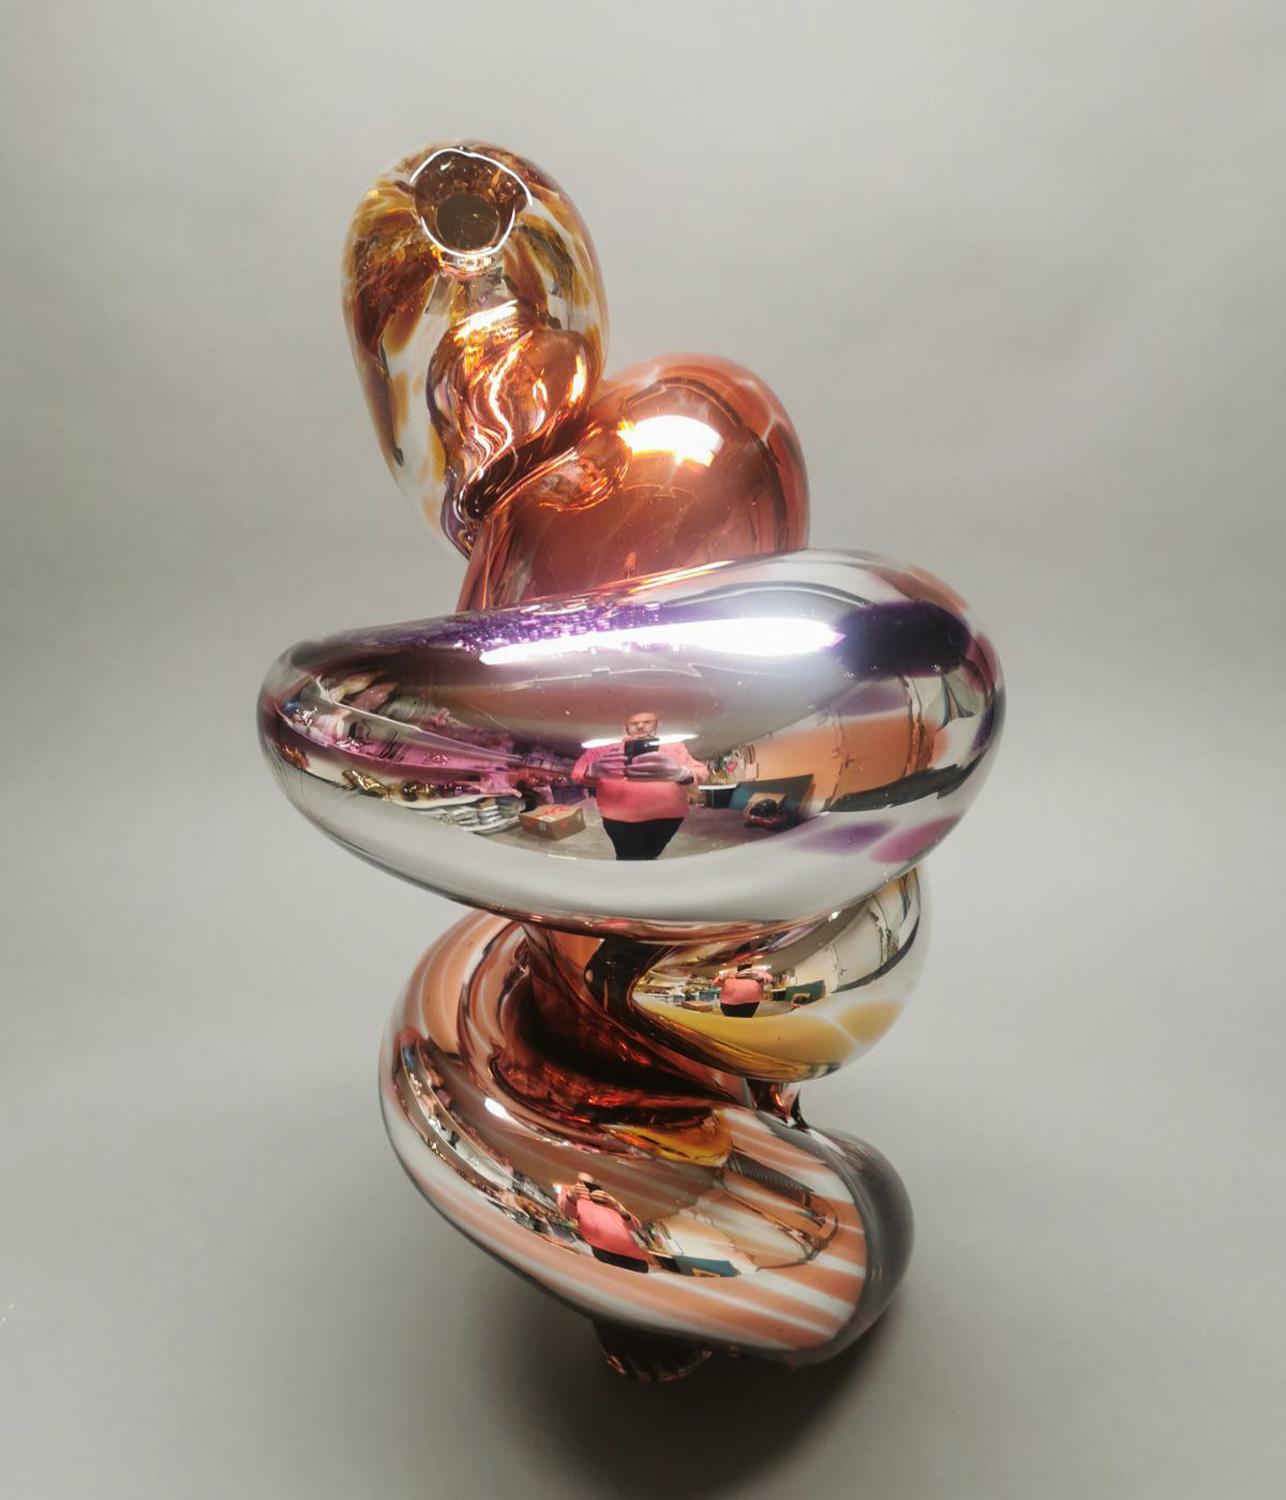 Hand-Crafted Abstract, Mirrored Glass Sculpture by Markus Emilsson, In Stock For Sale